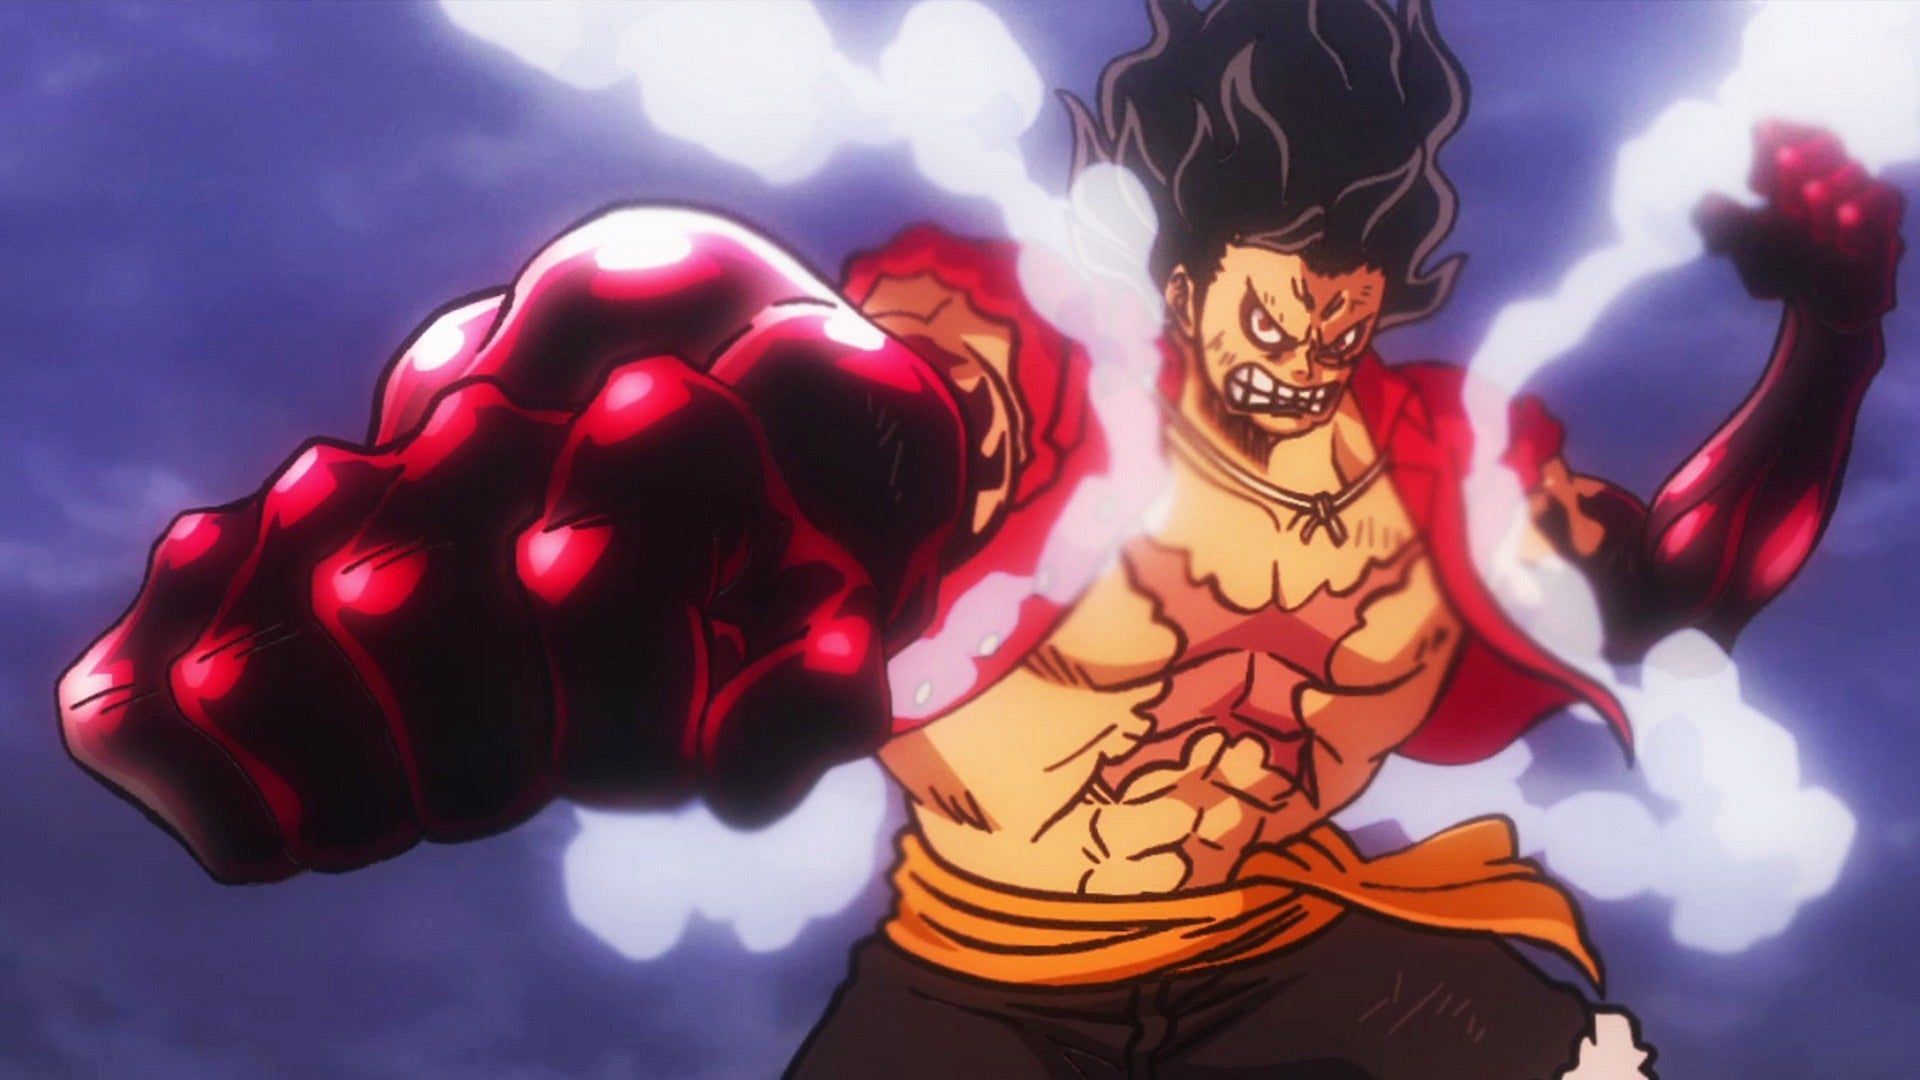 Release date, release time and where to watch One Piece episode 1001 (Image via Toei Animation)